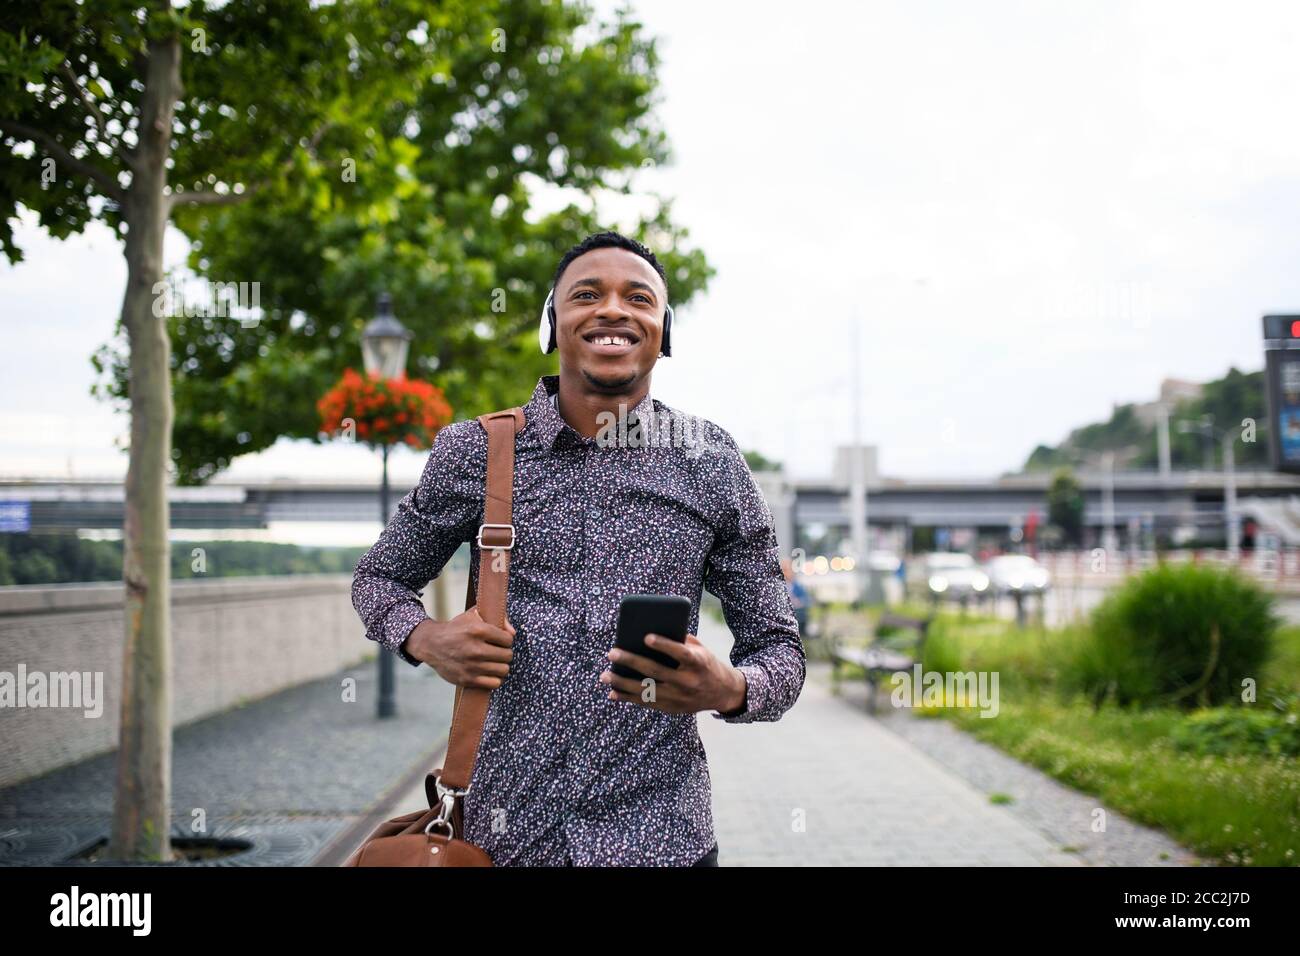 Cheerful young black man commuter outdoors in city, walking. Stock Photo